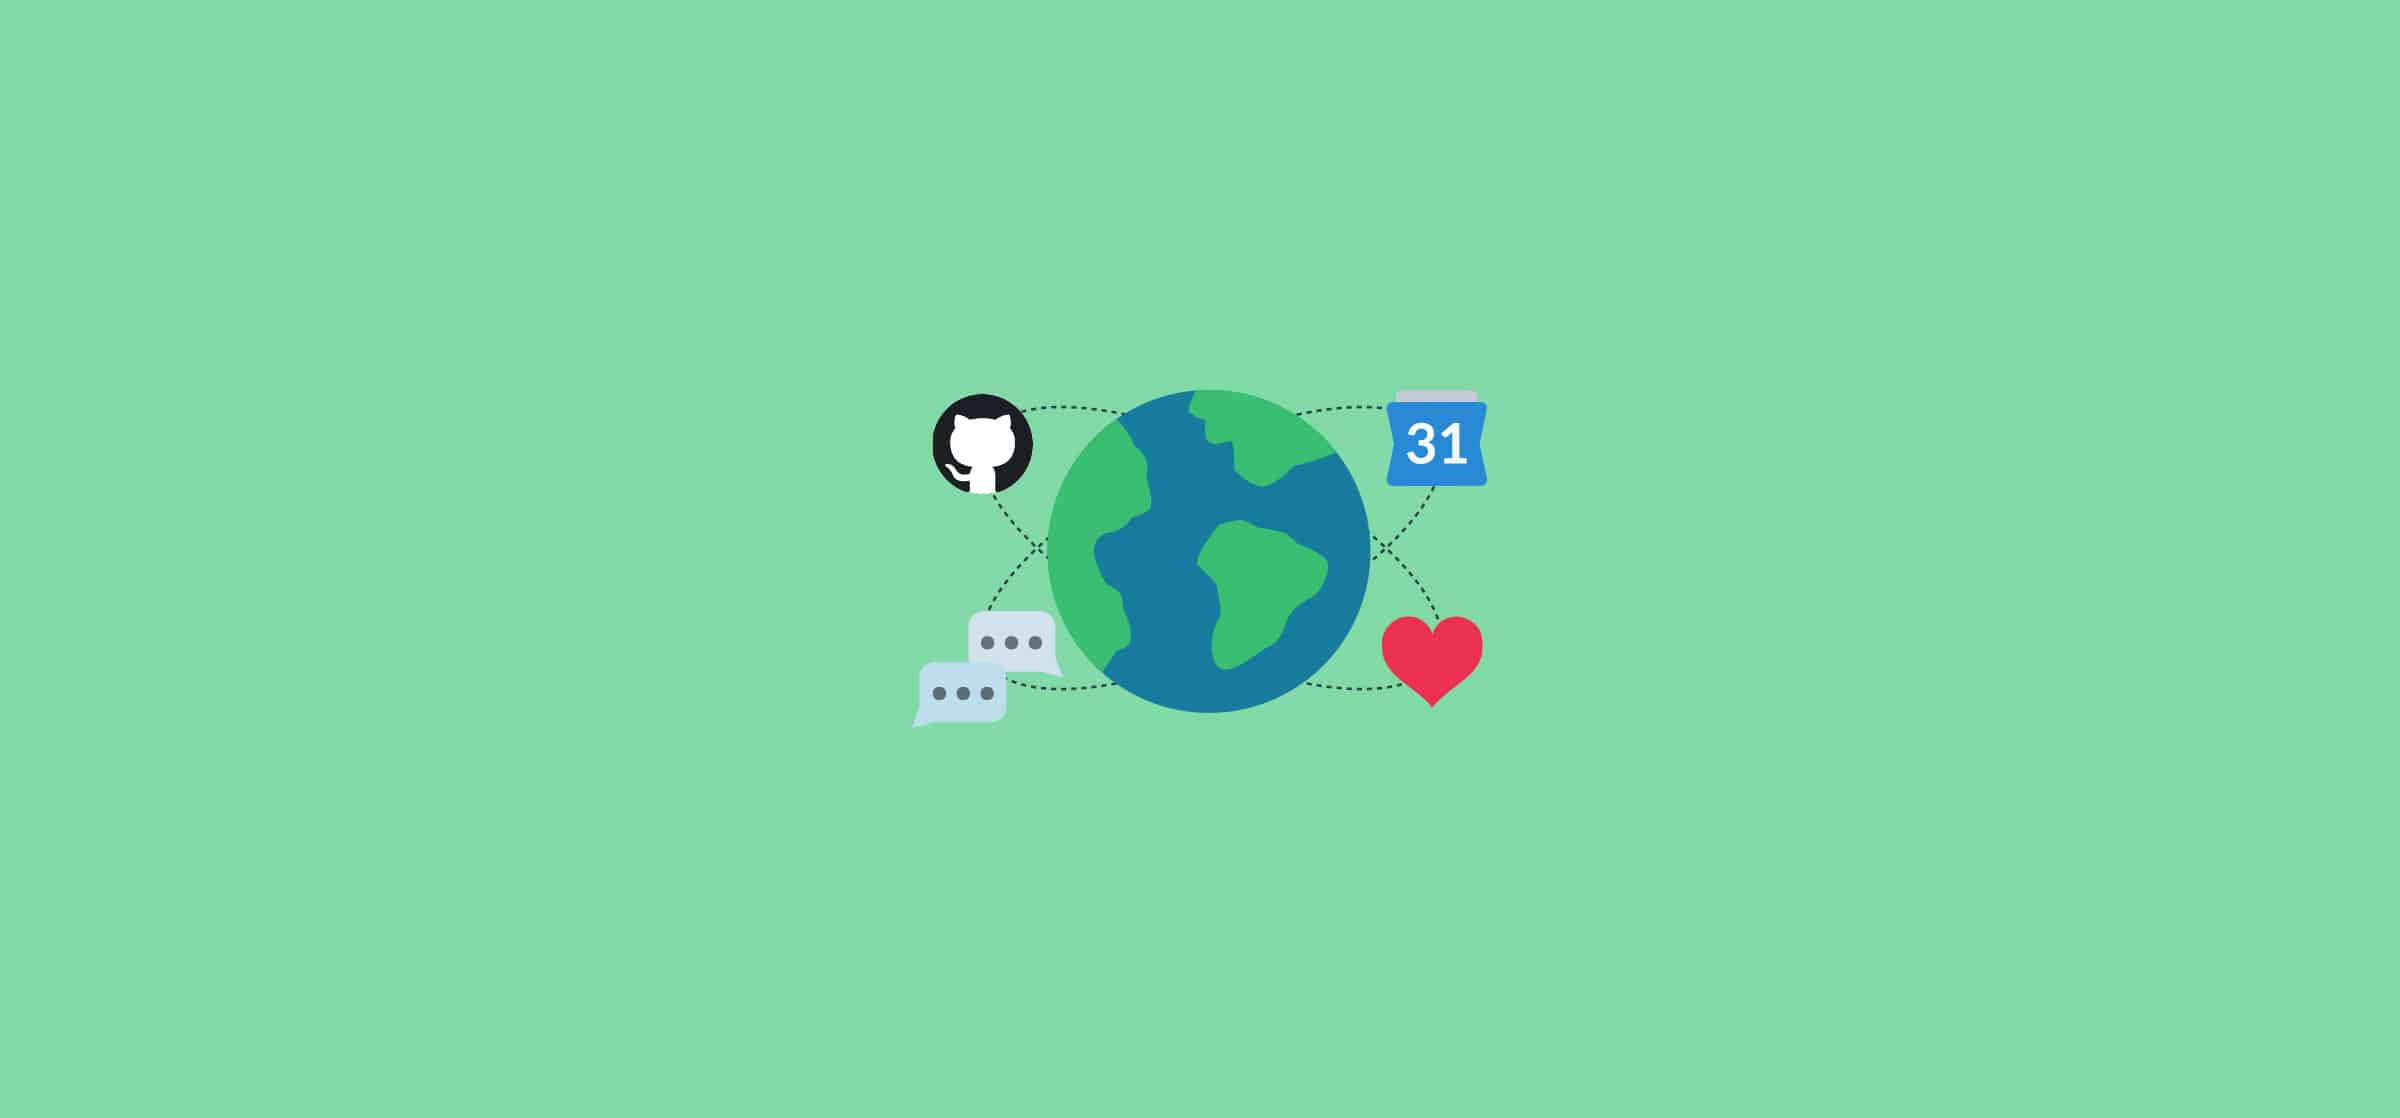 Planet earth surrounded by GitHub's logo, chat messages, a calendar, and a heart, representing GitHub project management